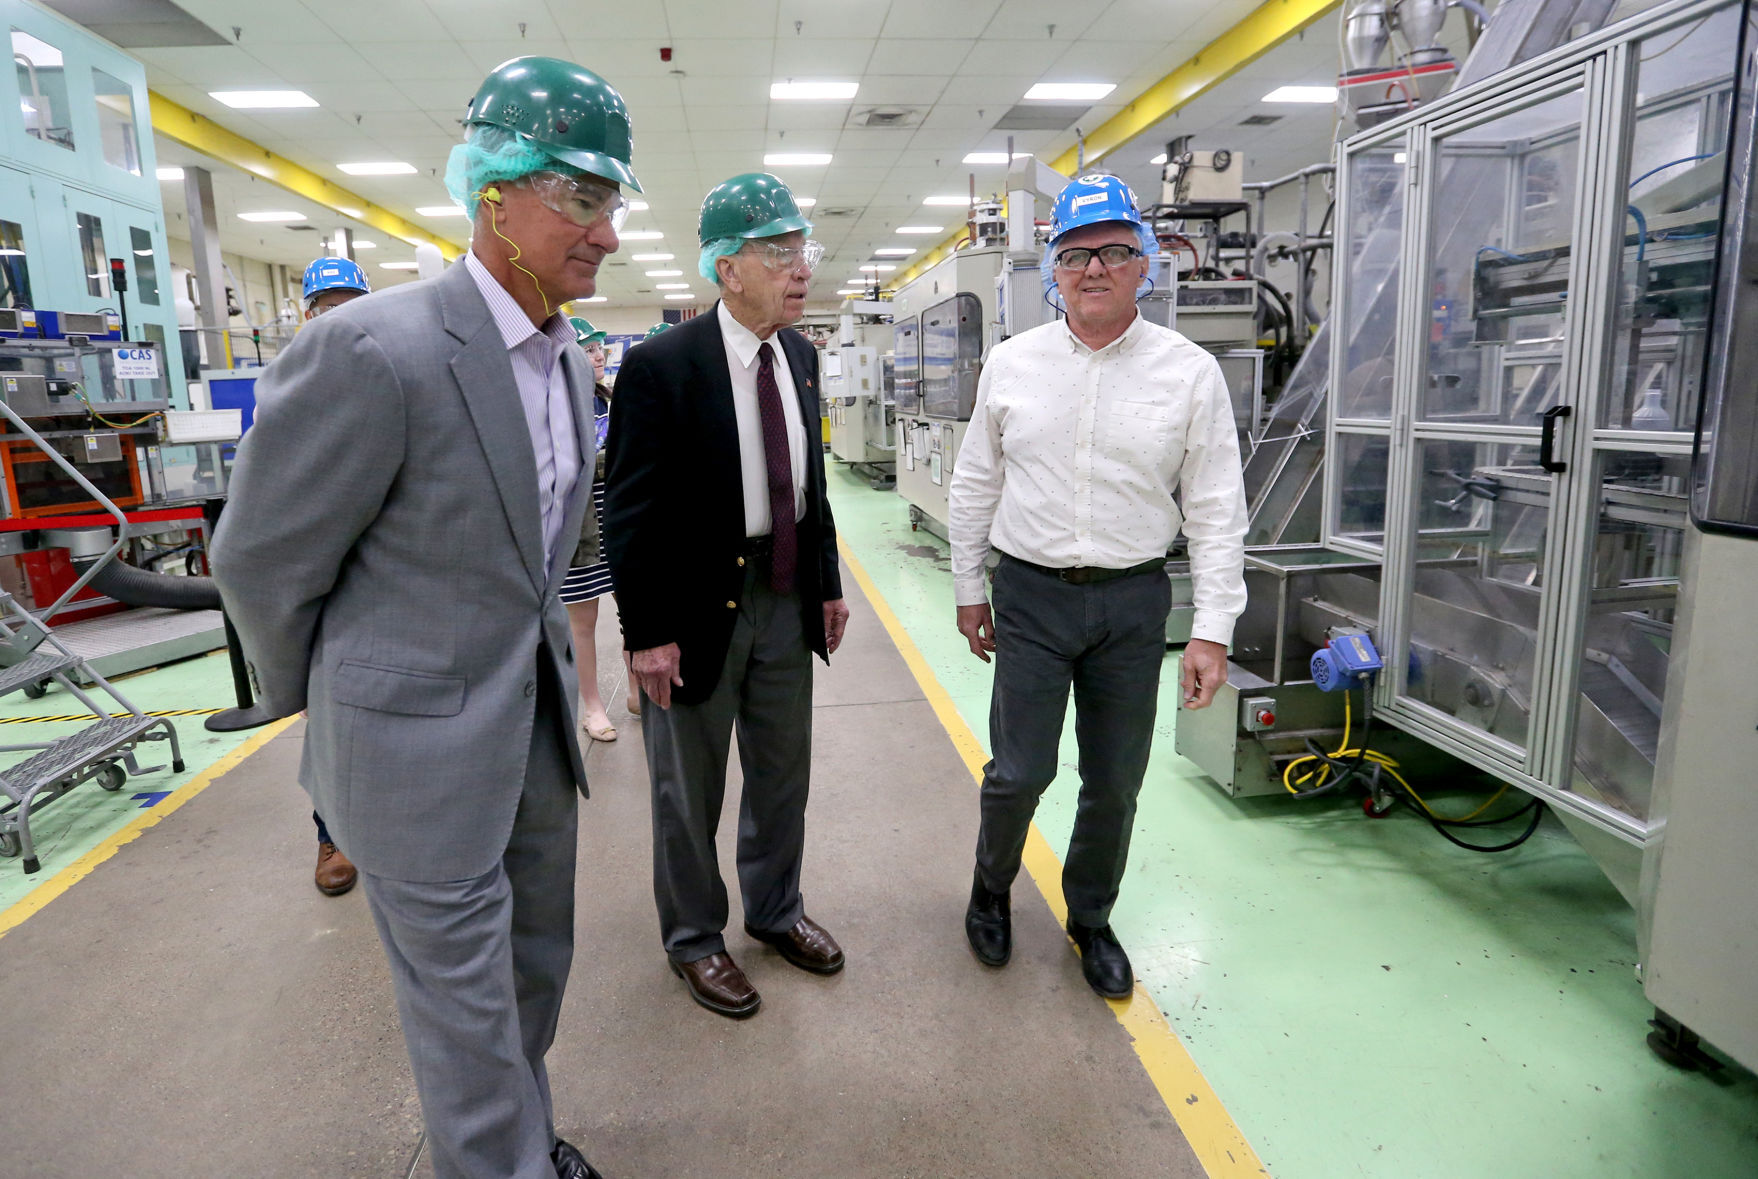 Tom Salmon (far left), president and CEO at Berry Plastics, and Vyron Nelson (far right), plant manager at Berry Plastics, speak with U.S. Sen. Chuck Grassley (left), R-Iowa, during a tour of the company